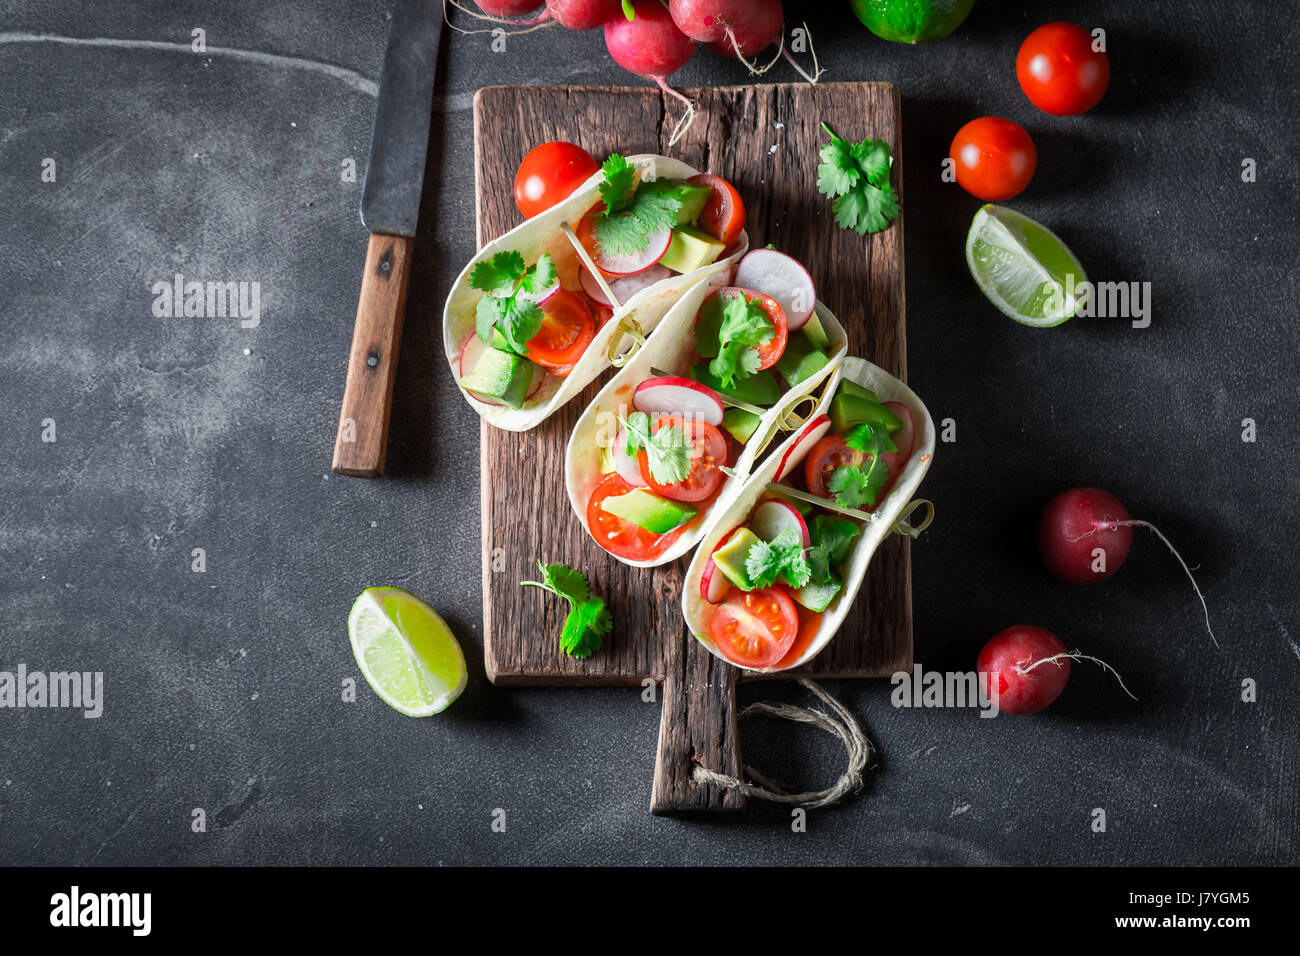 Mexican tacos as a small fresh appetizer Stock Photo